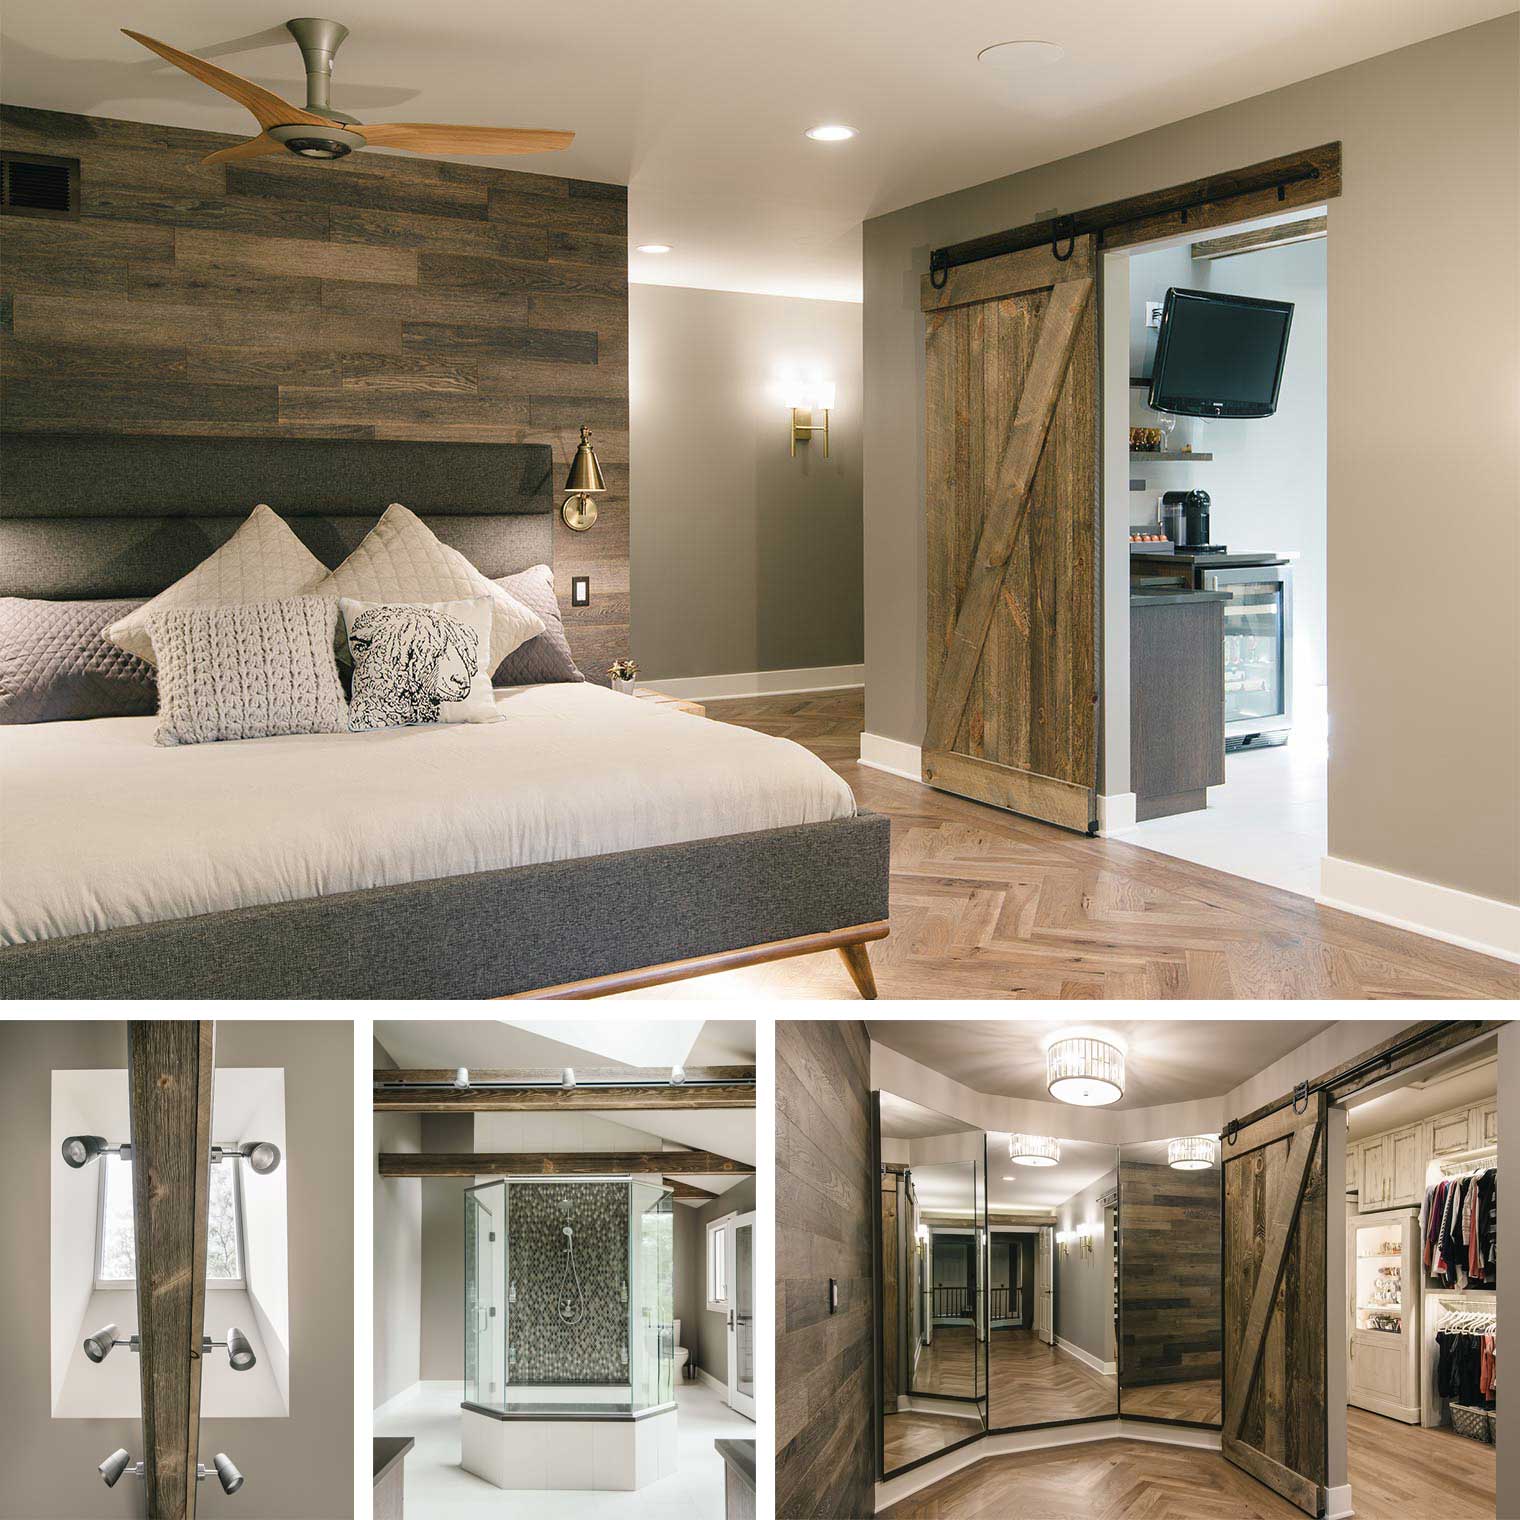 Silent Rivers projects 2017_master suite remodel by Silent Rivers with barn wood walls doors and beams, central shower, three way mirror, dressing room closet